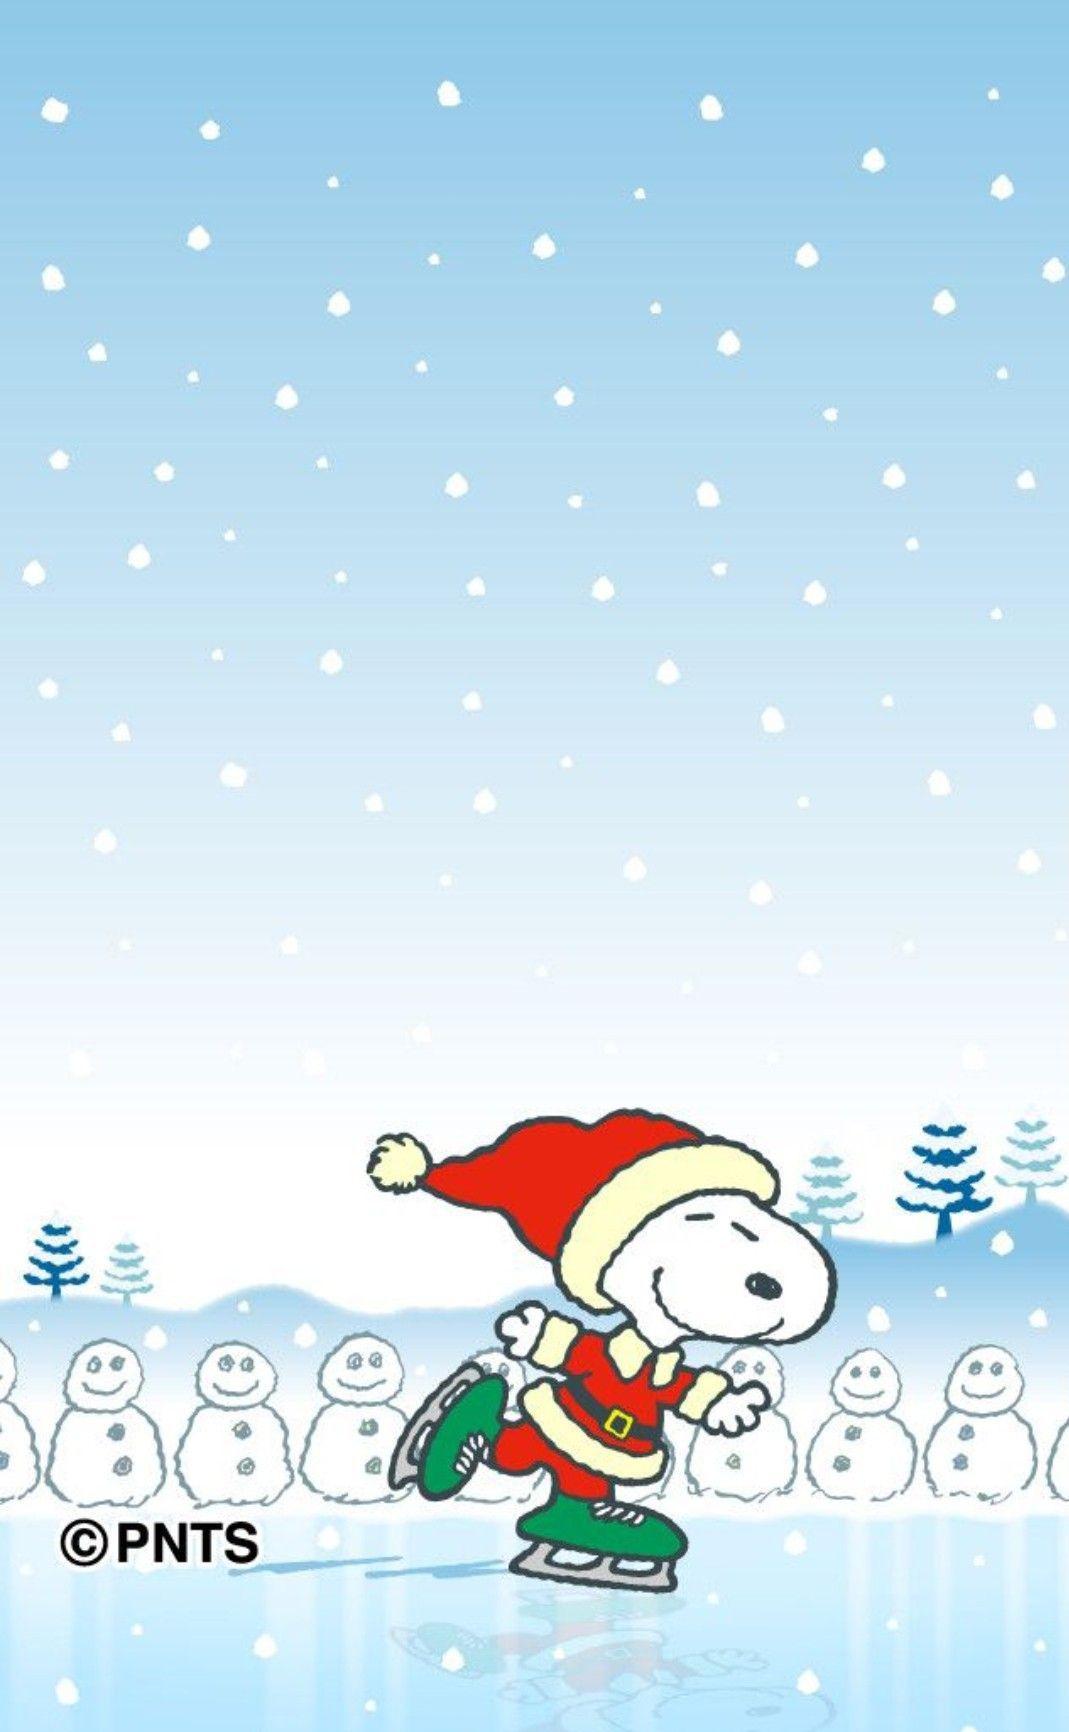 Christmas snoopy wallpaper iphone